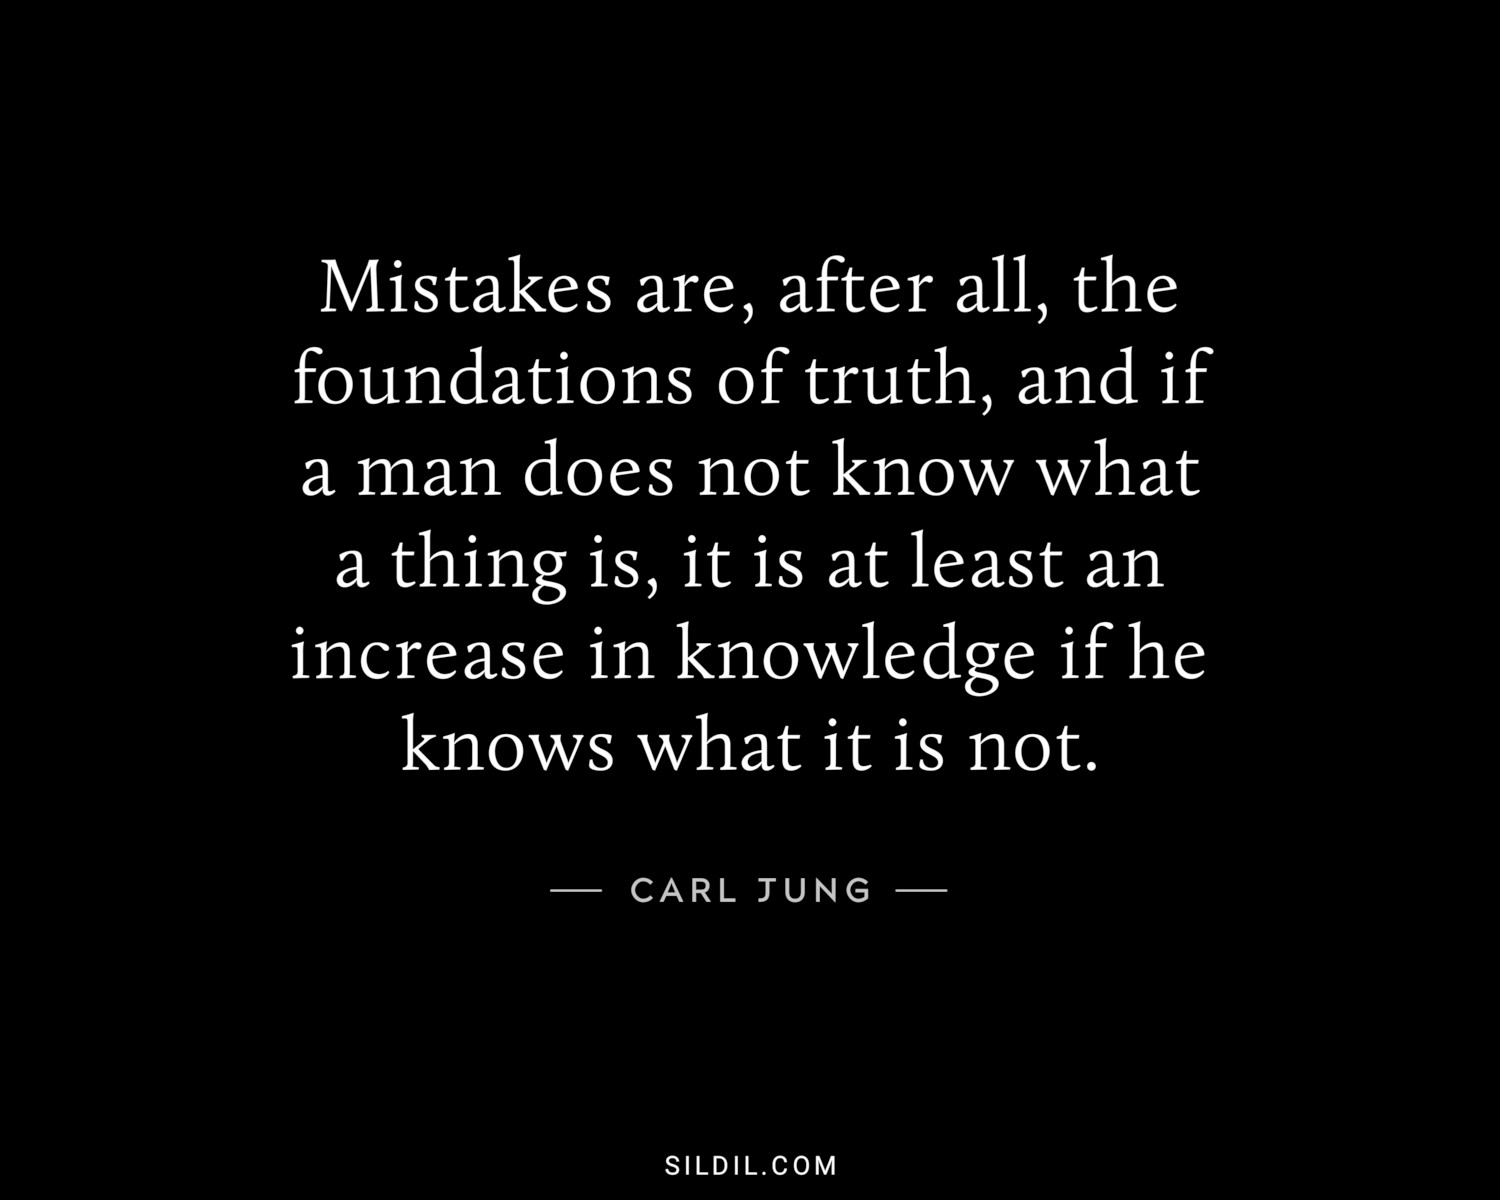 Mistakes are, after all, the foundations of truth, and if a man does not know what a thing is, it is at least an increase in knowledge if he knows what it is not.